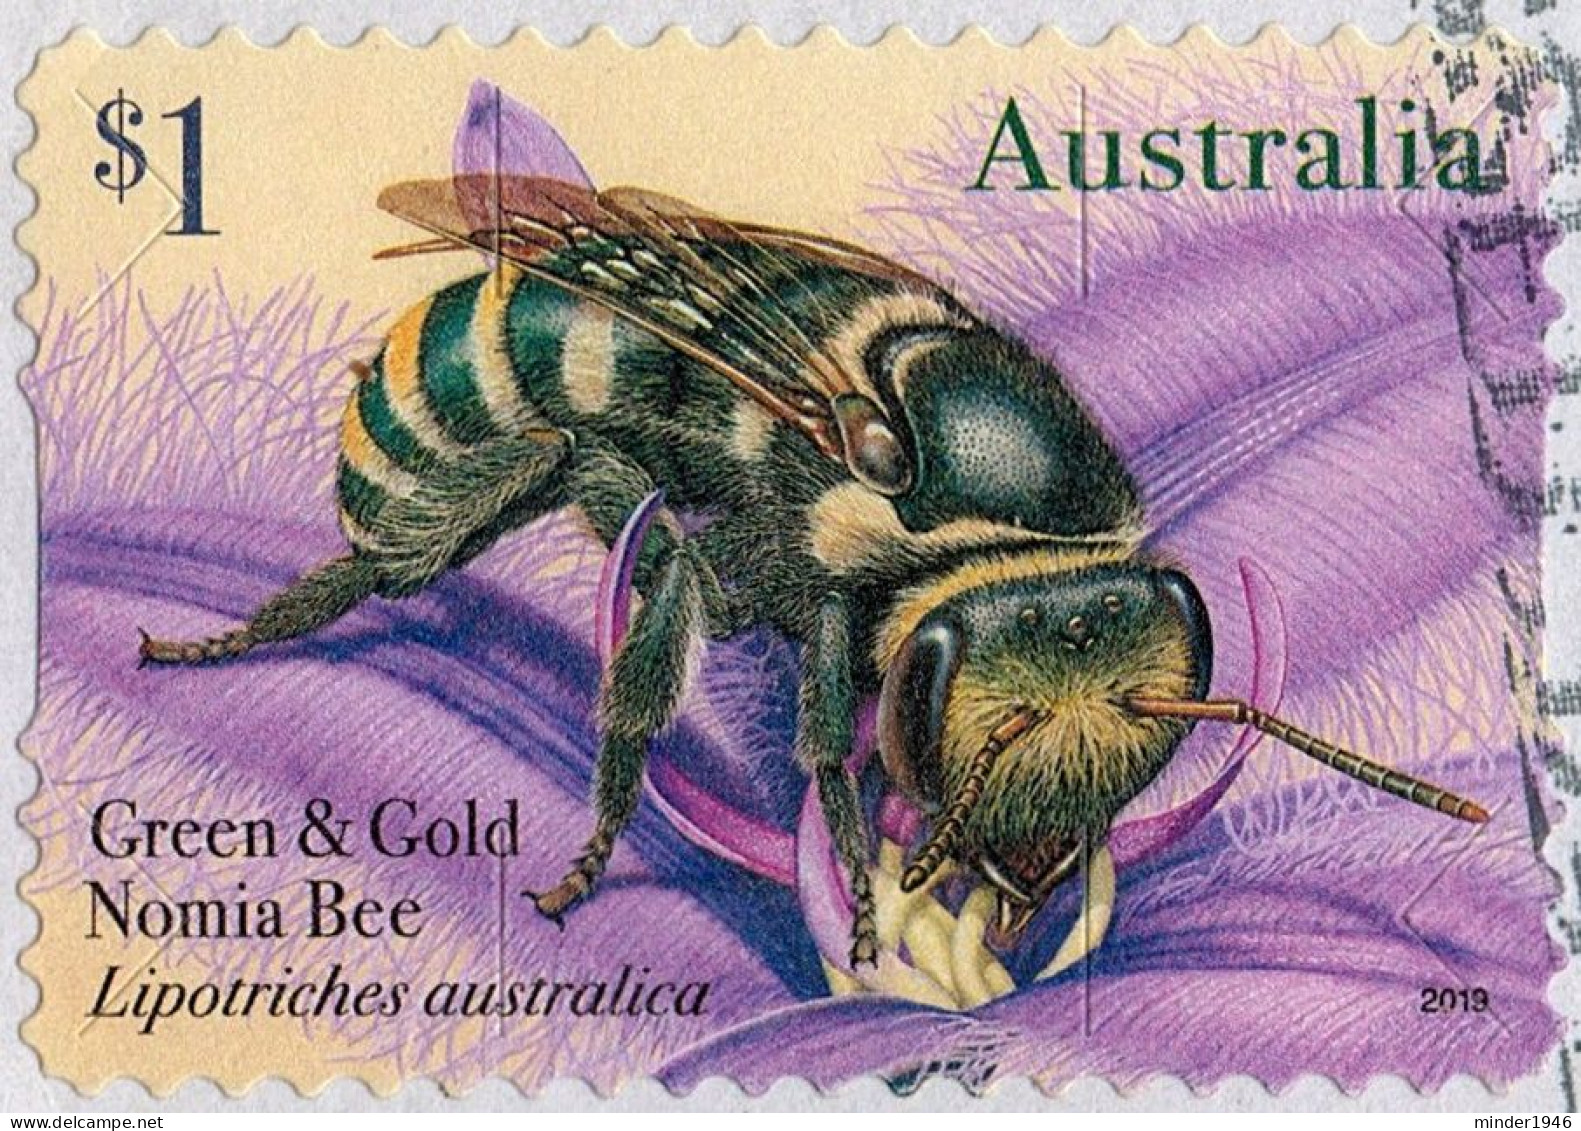 AUSTRALIA 2019 $1 Multicoloured, Native Bees-Green & Gold Nomia Bee Die-Cut Self Adhesive Used - Gebraucht